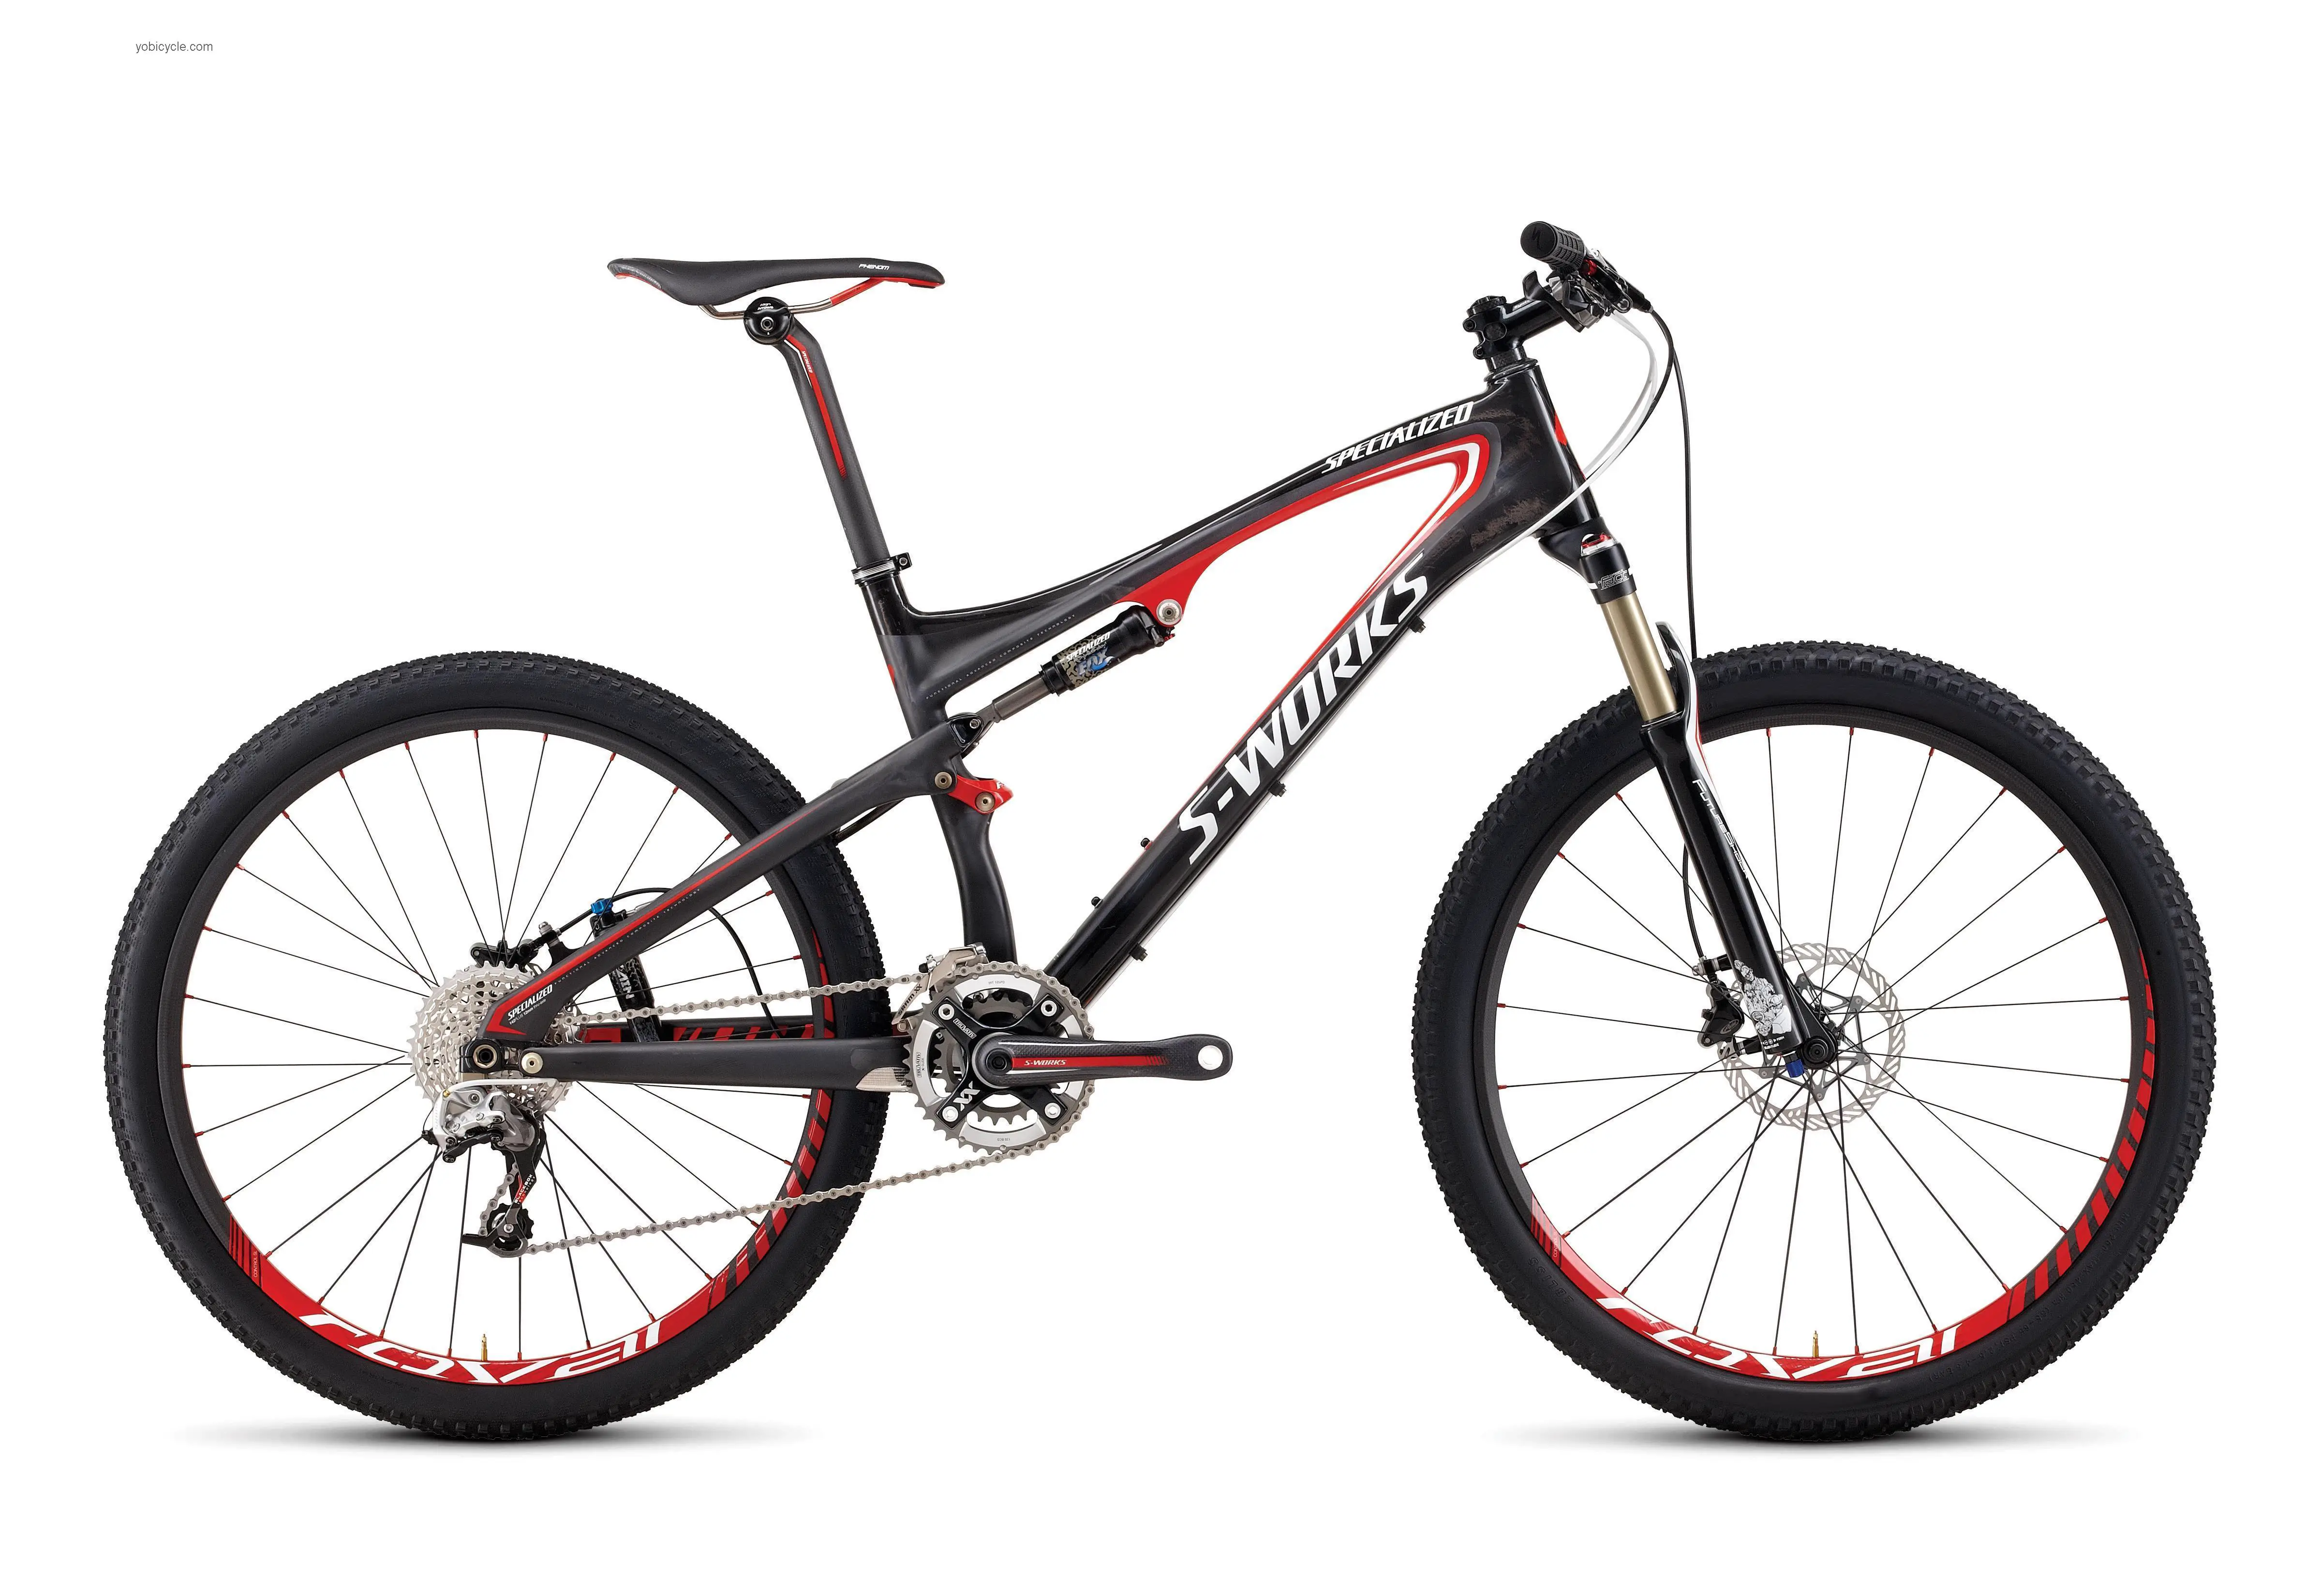 Specialized S-Works Epic FSR Carbon 2011 comparison online with competitors